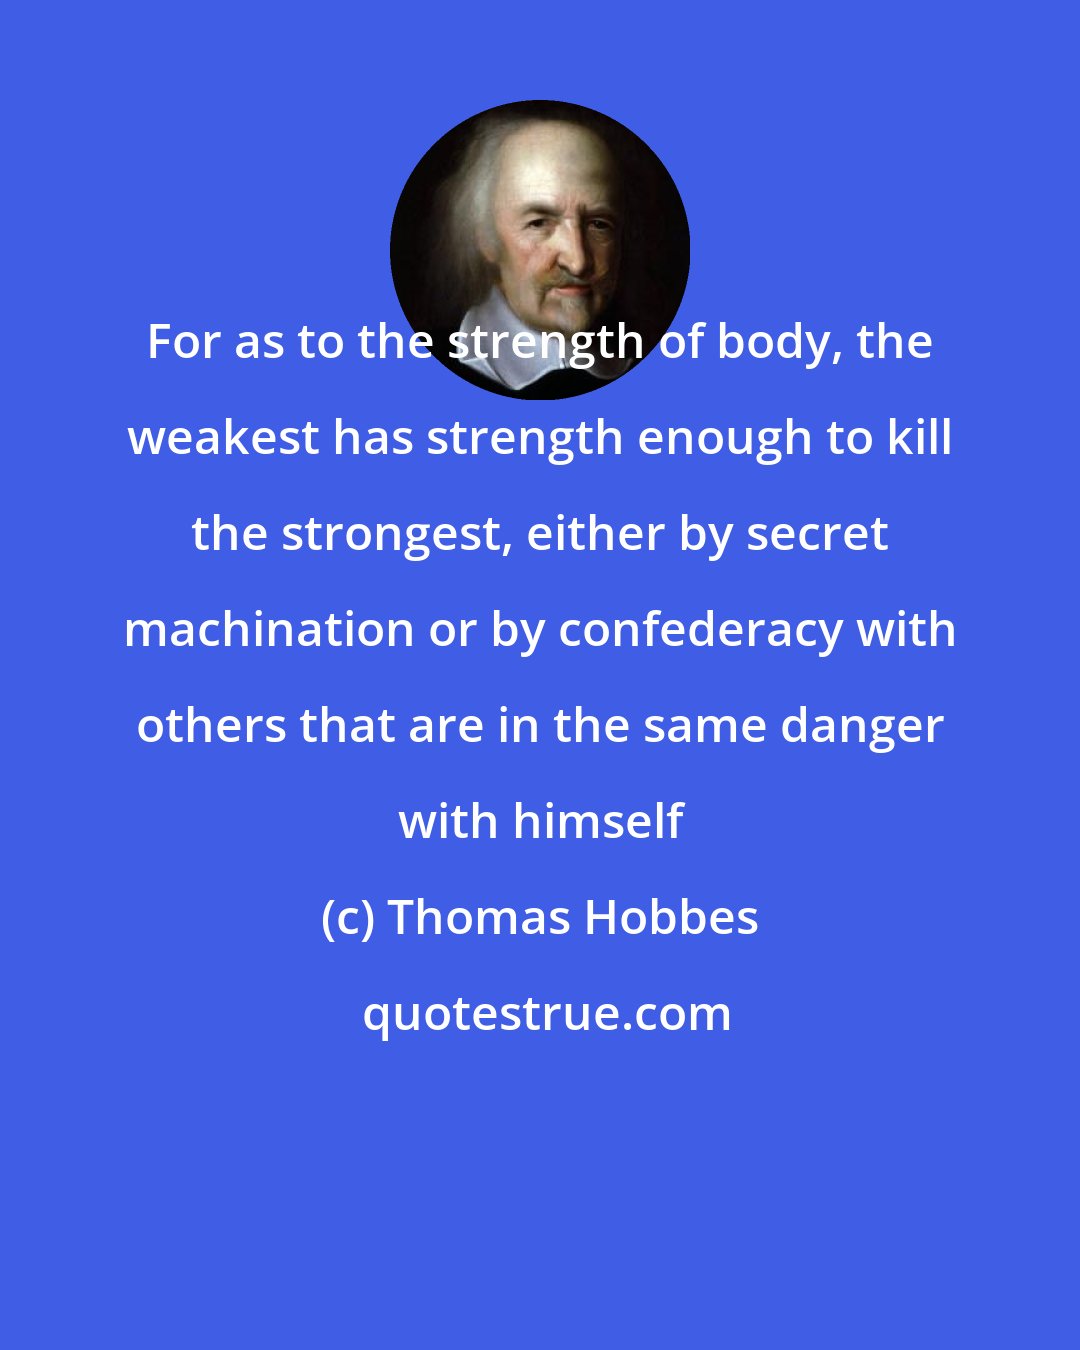 Thomas Hobbes: For as to the strength of body, the weakest has strength enough to kill the strongest, either by secret machination or by confederacy with others that are in the same danger with himself